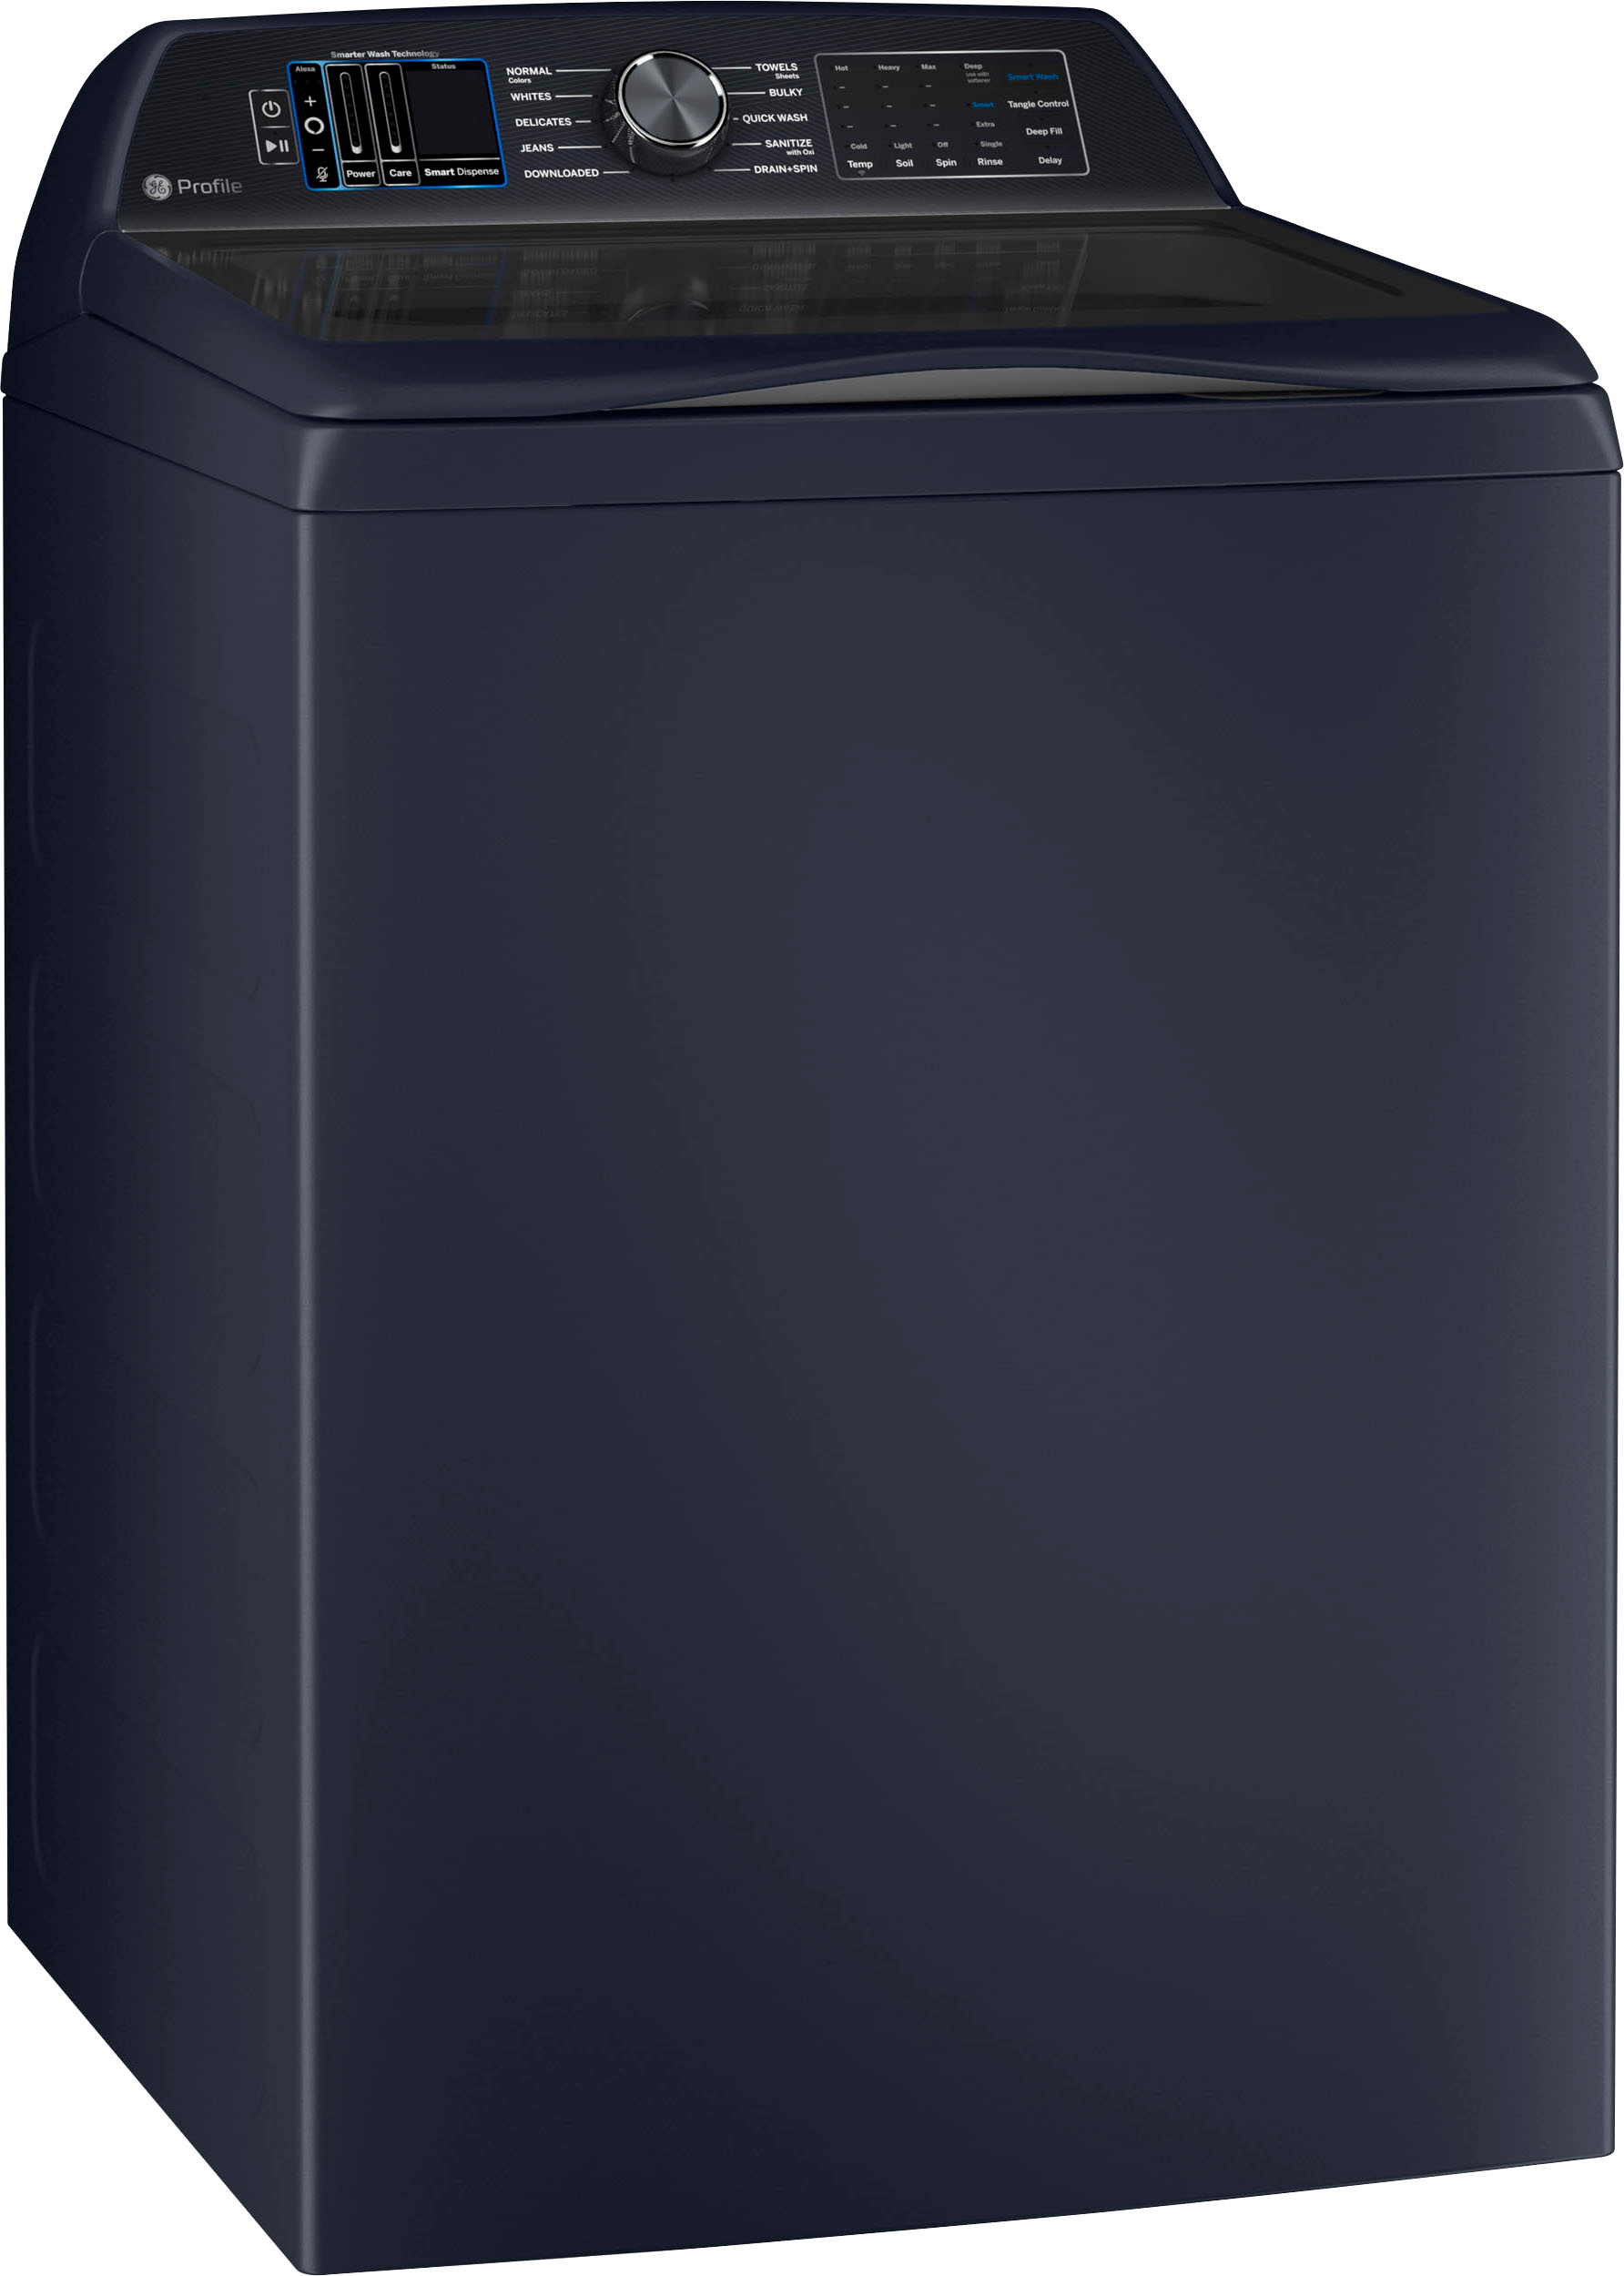 Angle View: GE Profile - 5.3 Cu. Ft. High Efficiency Top Load Washer with Smarter Wash Technology, Easier Reach & Microban Technology - Sapphire Blue